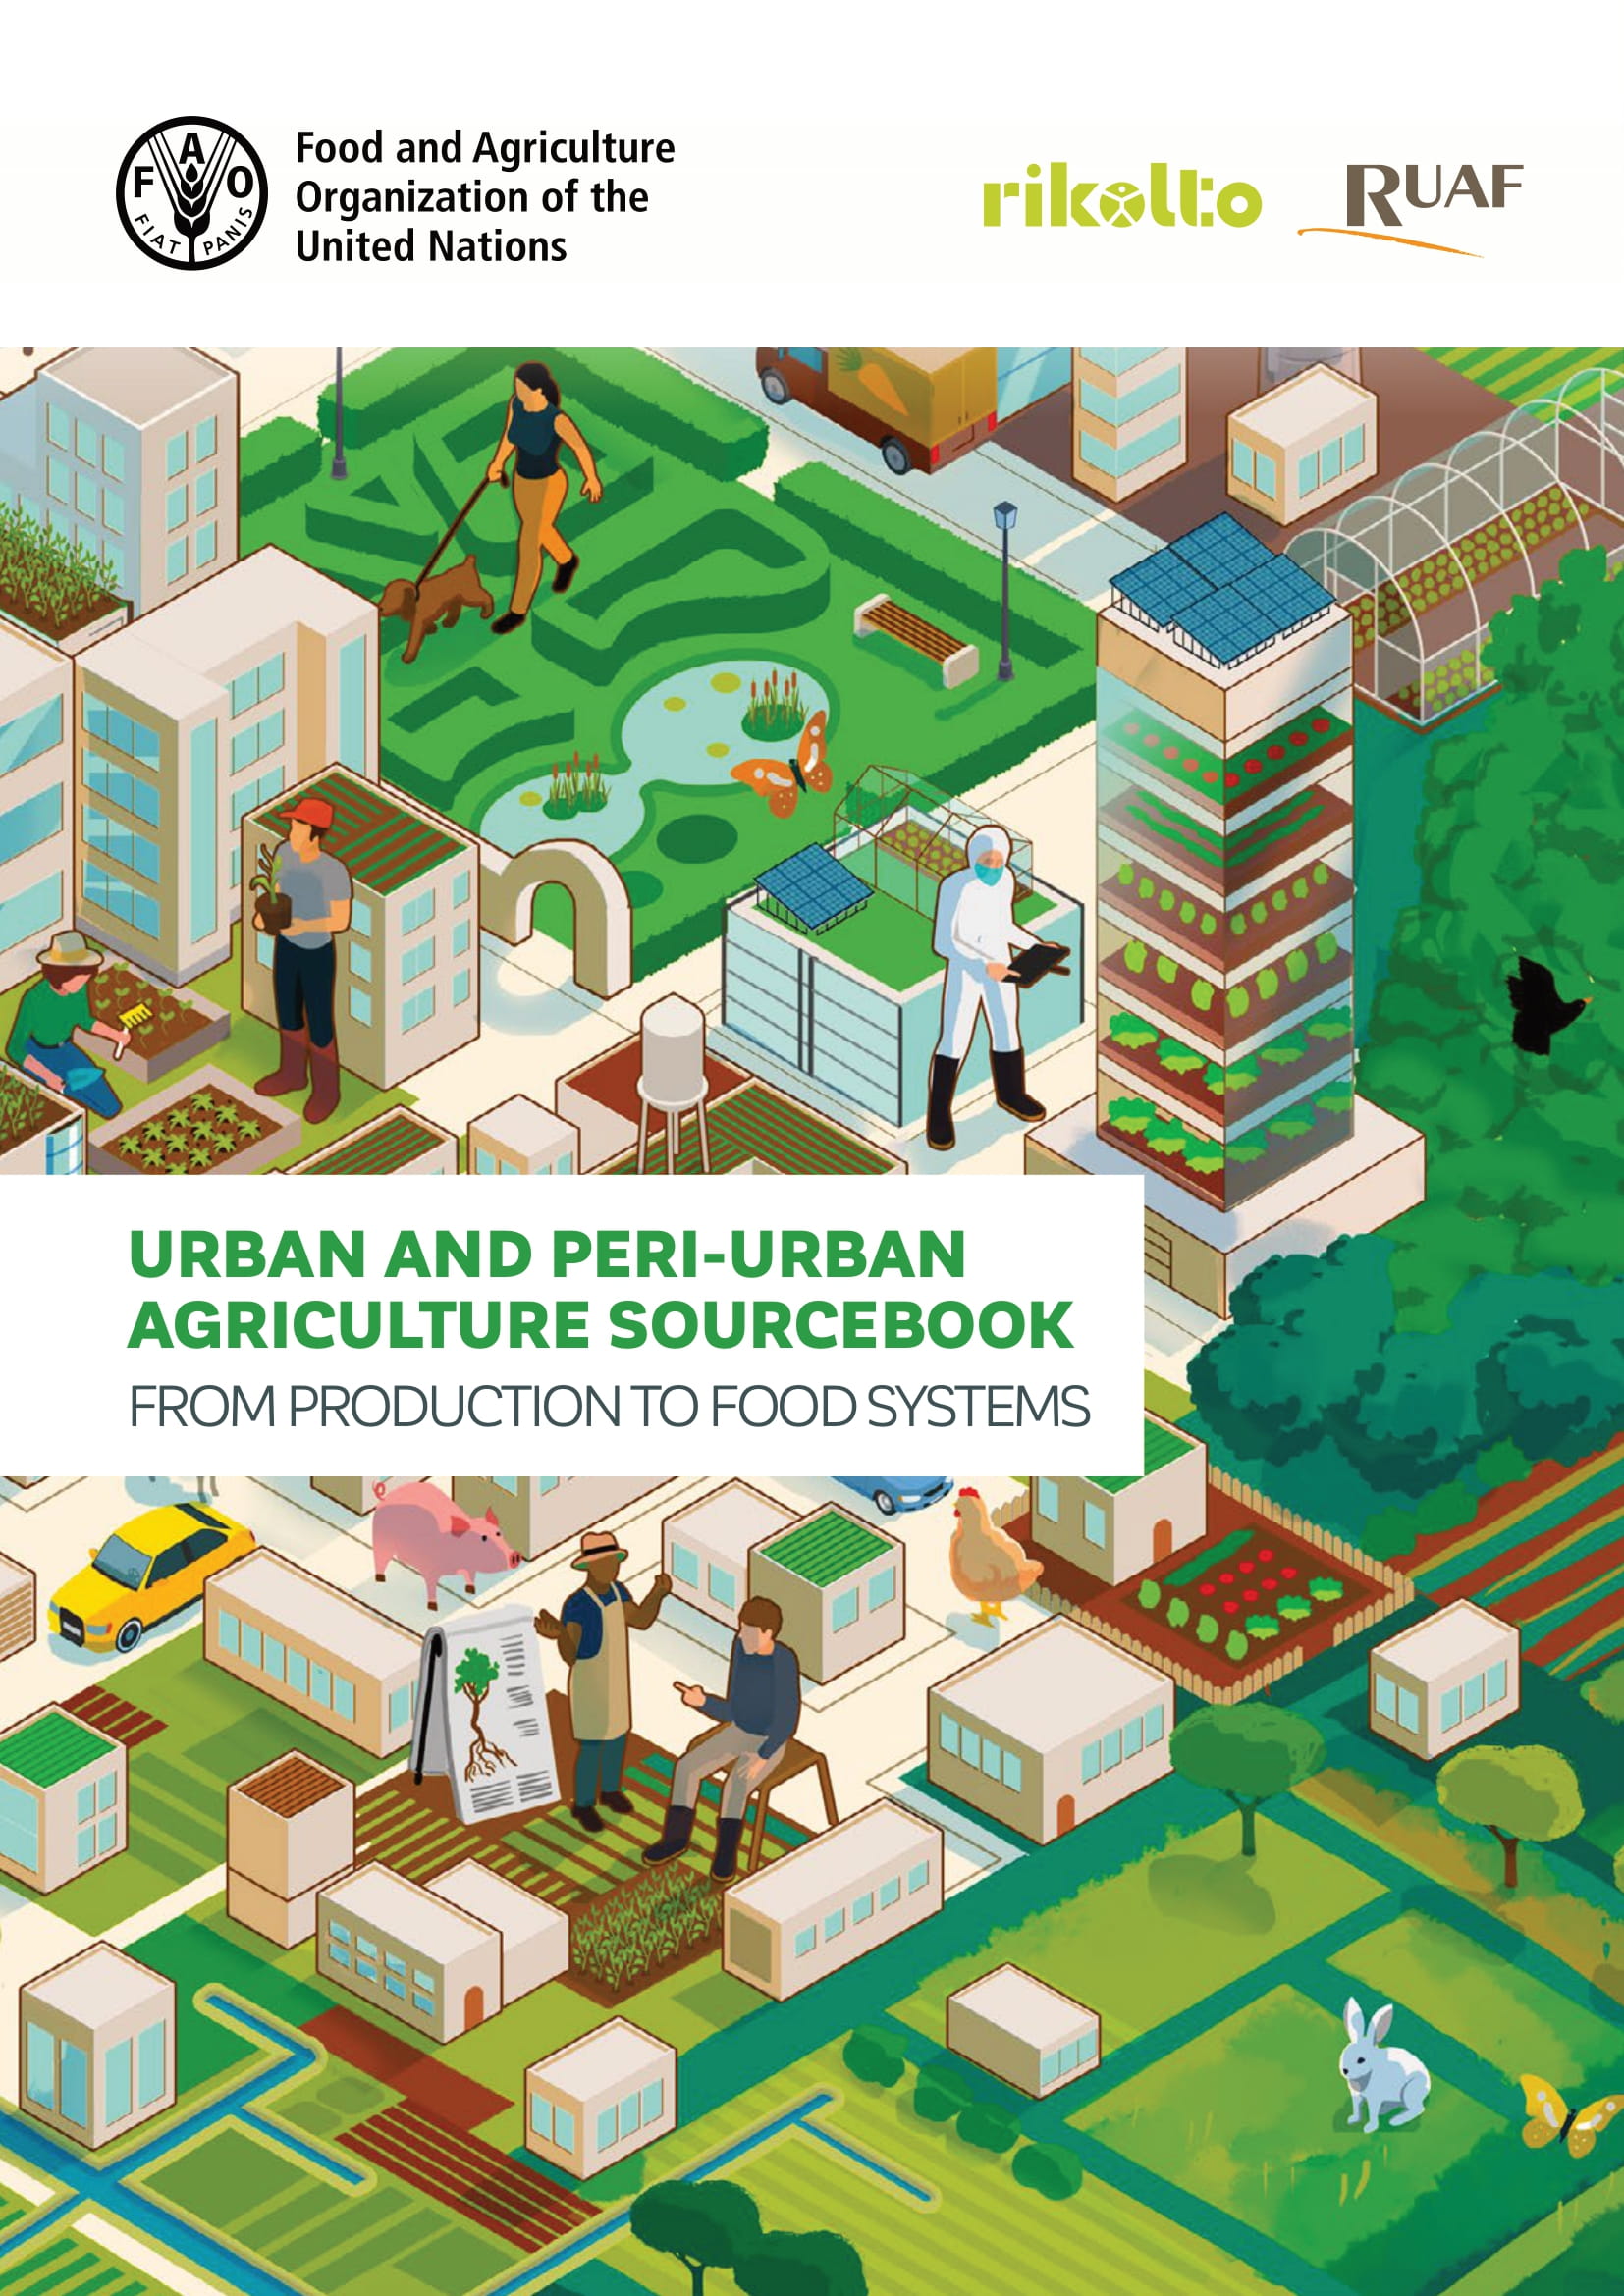 Launch of the Urban and Peri-Urban Agriculture Sourcebook